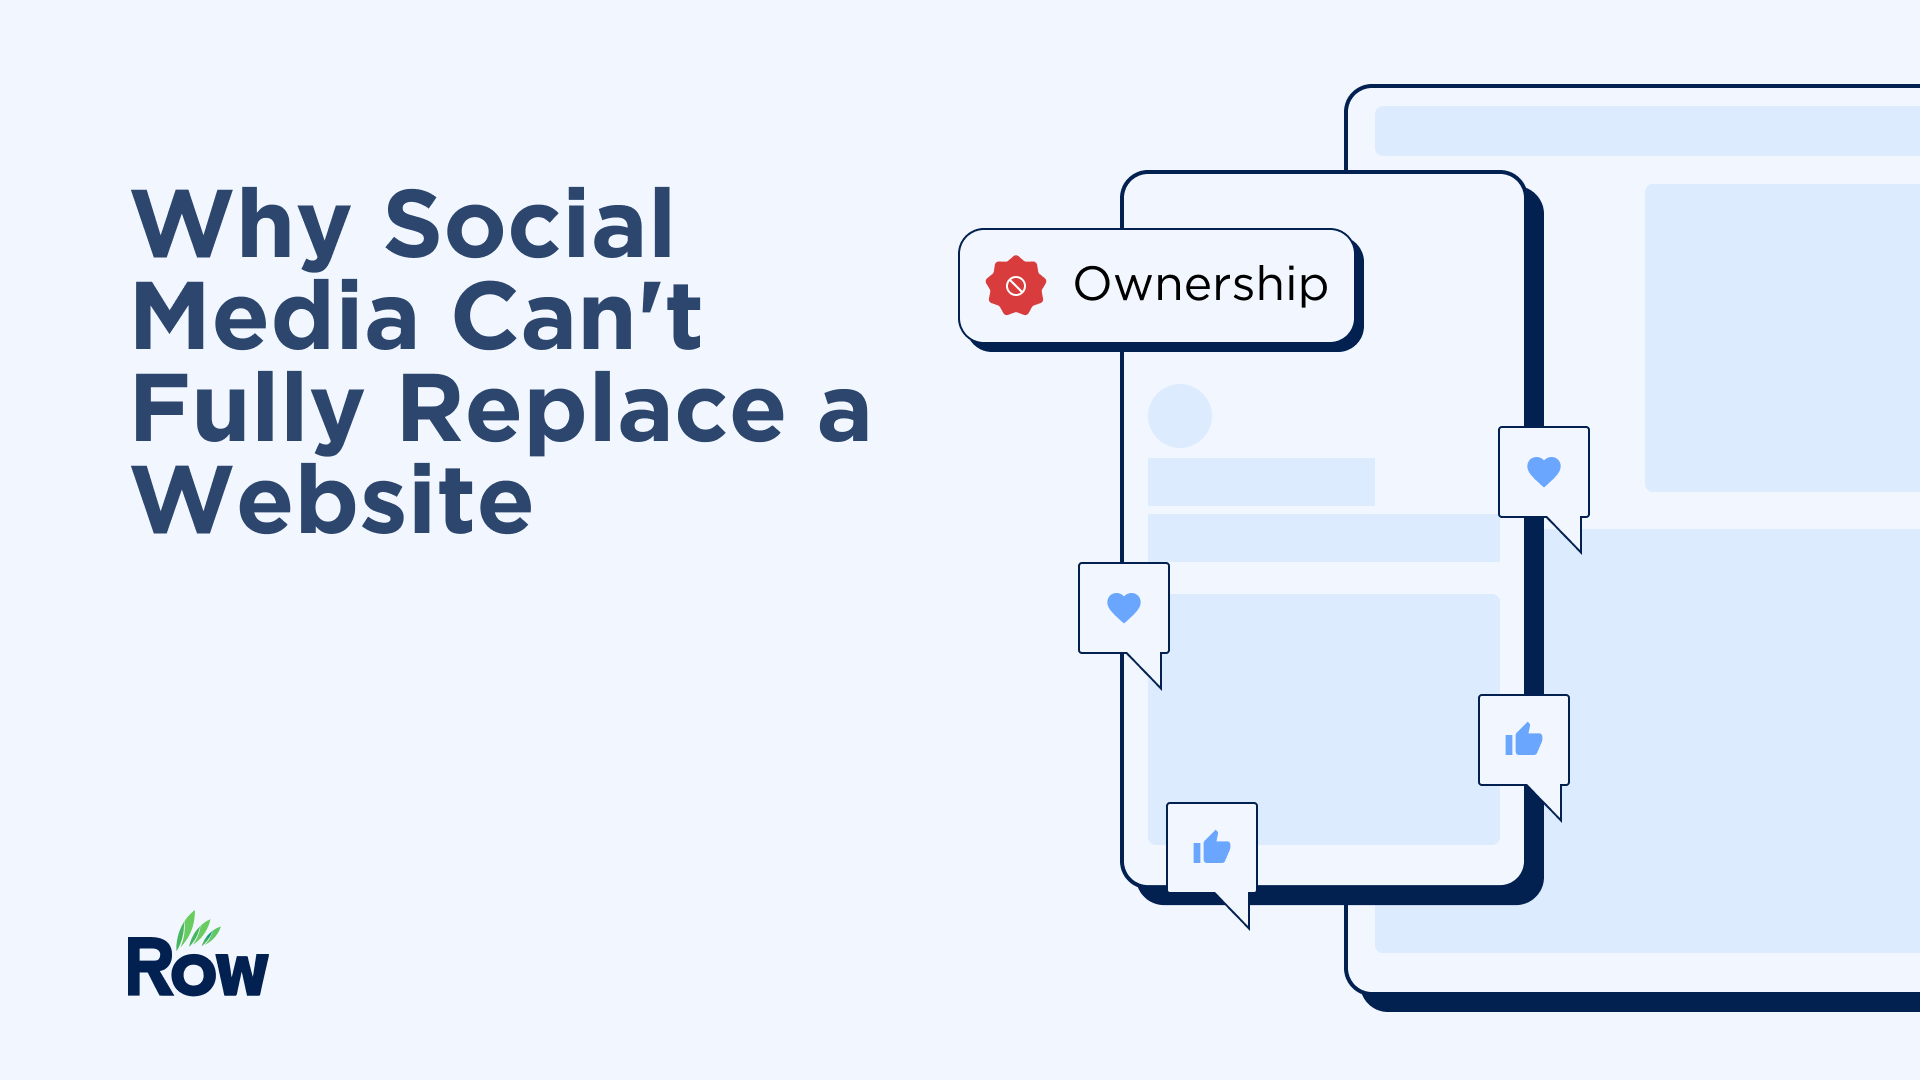 Why Social Media Can't Fully Replace a Website